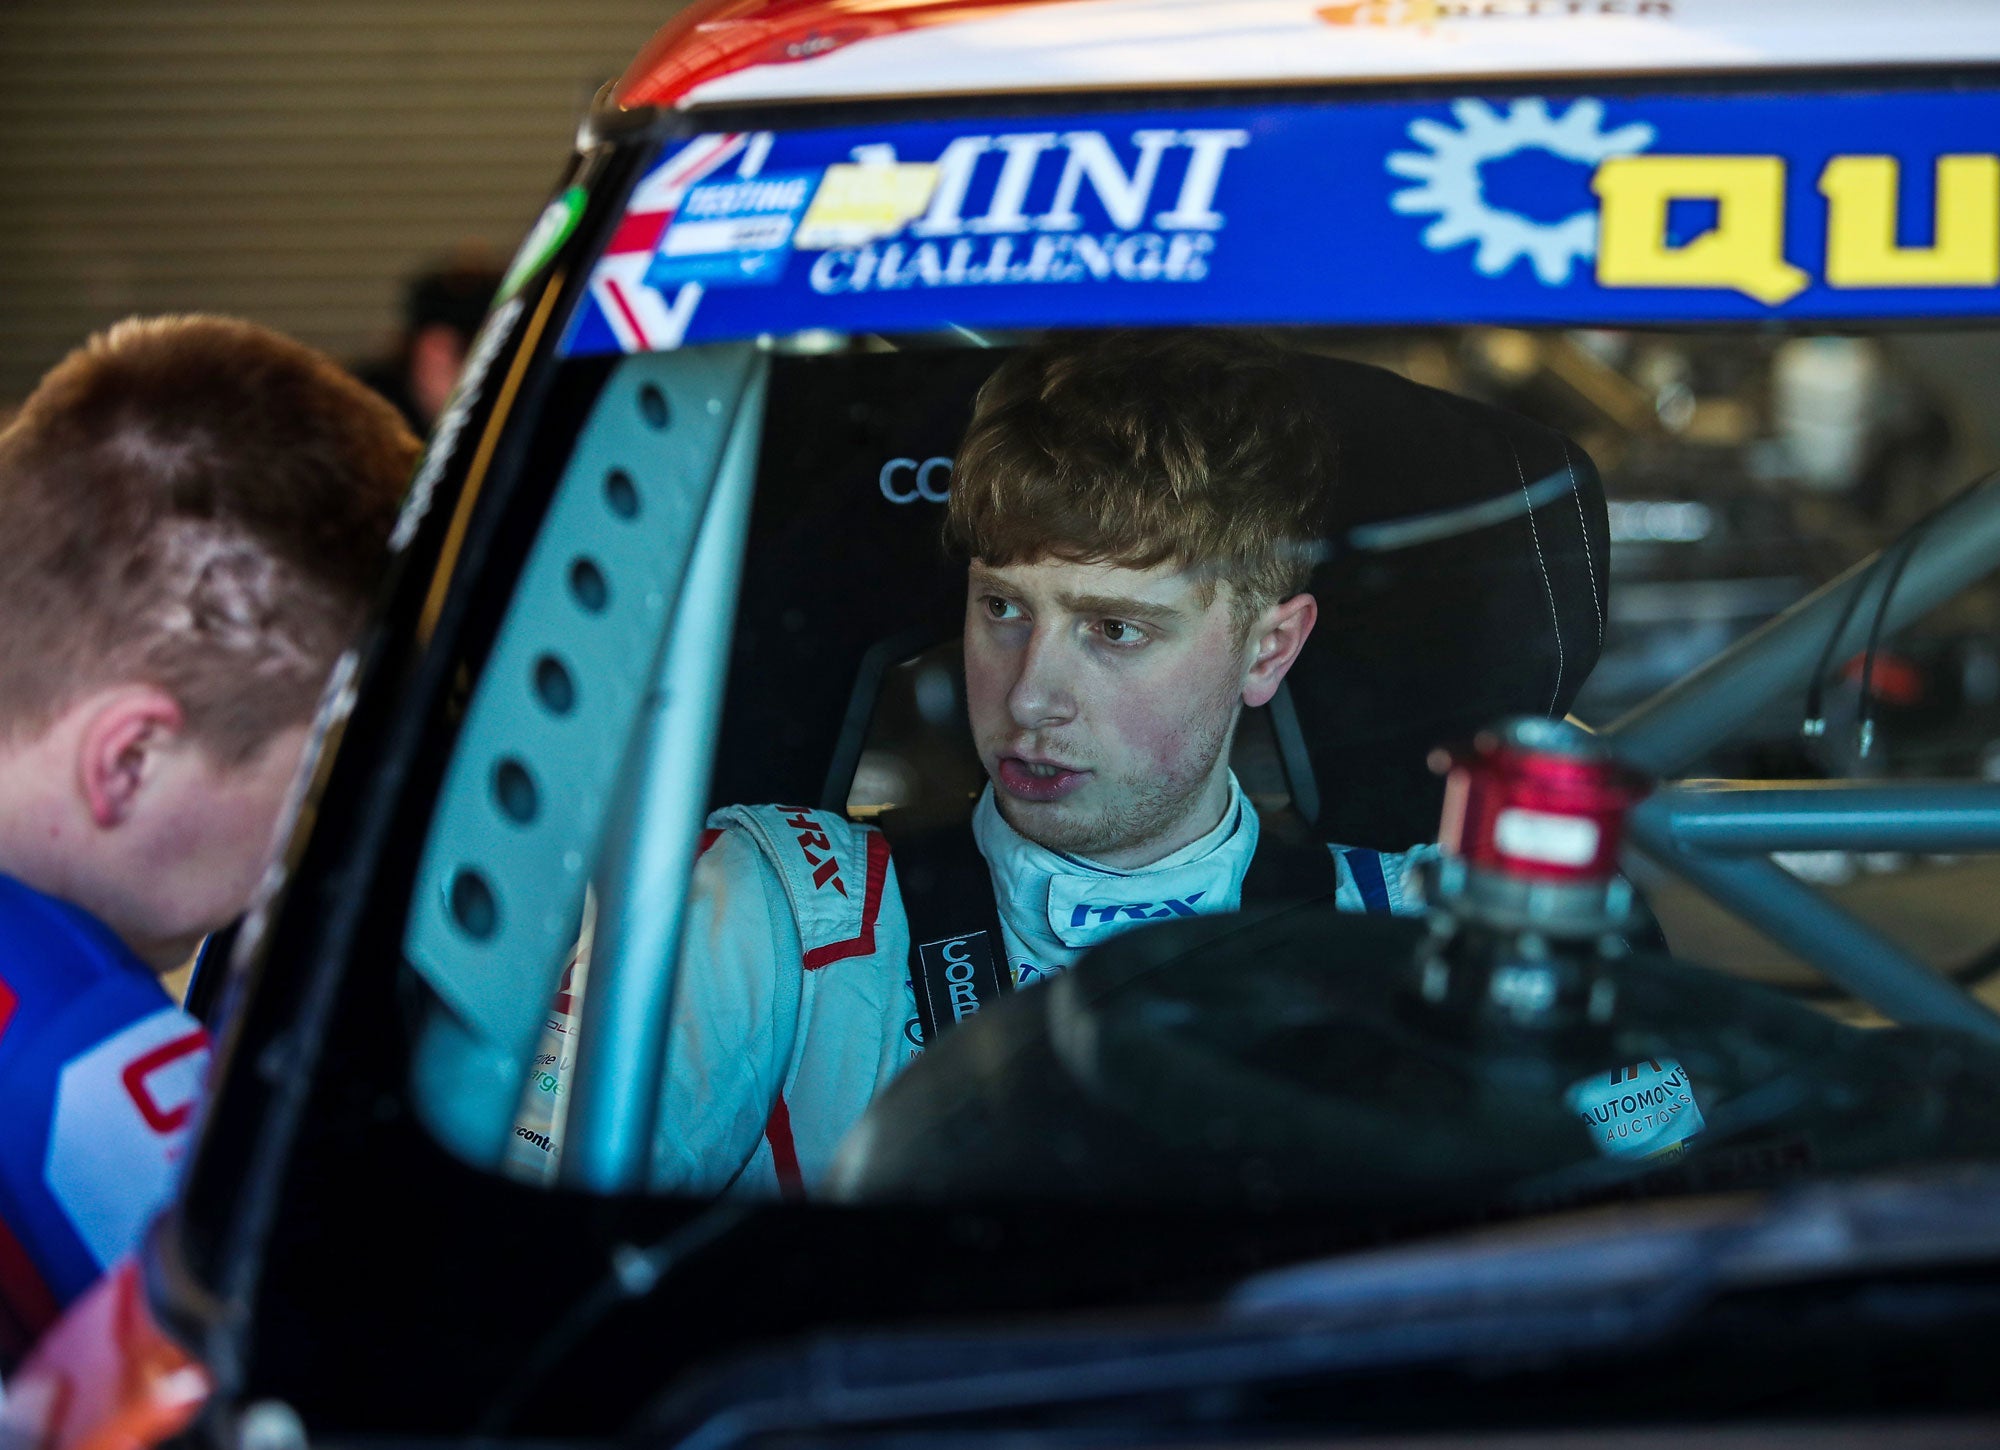 Bradley Gravett son of BTCC British Touring Car Champion Robb Gravett in the MINI Challenge JCW Series at Silverstone National Tyre Test in 2022 Sat in Race Car Graves Motorsport Cooper Racing Driver LIQUI MOLY LM Performance Thinking it Better